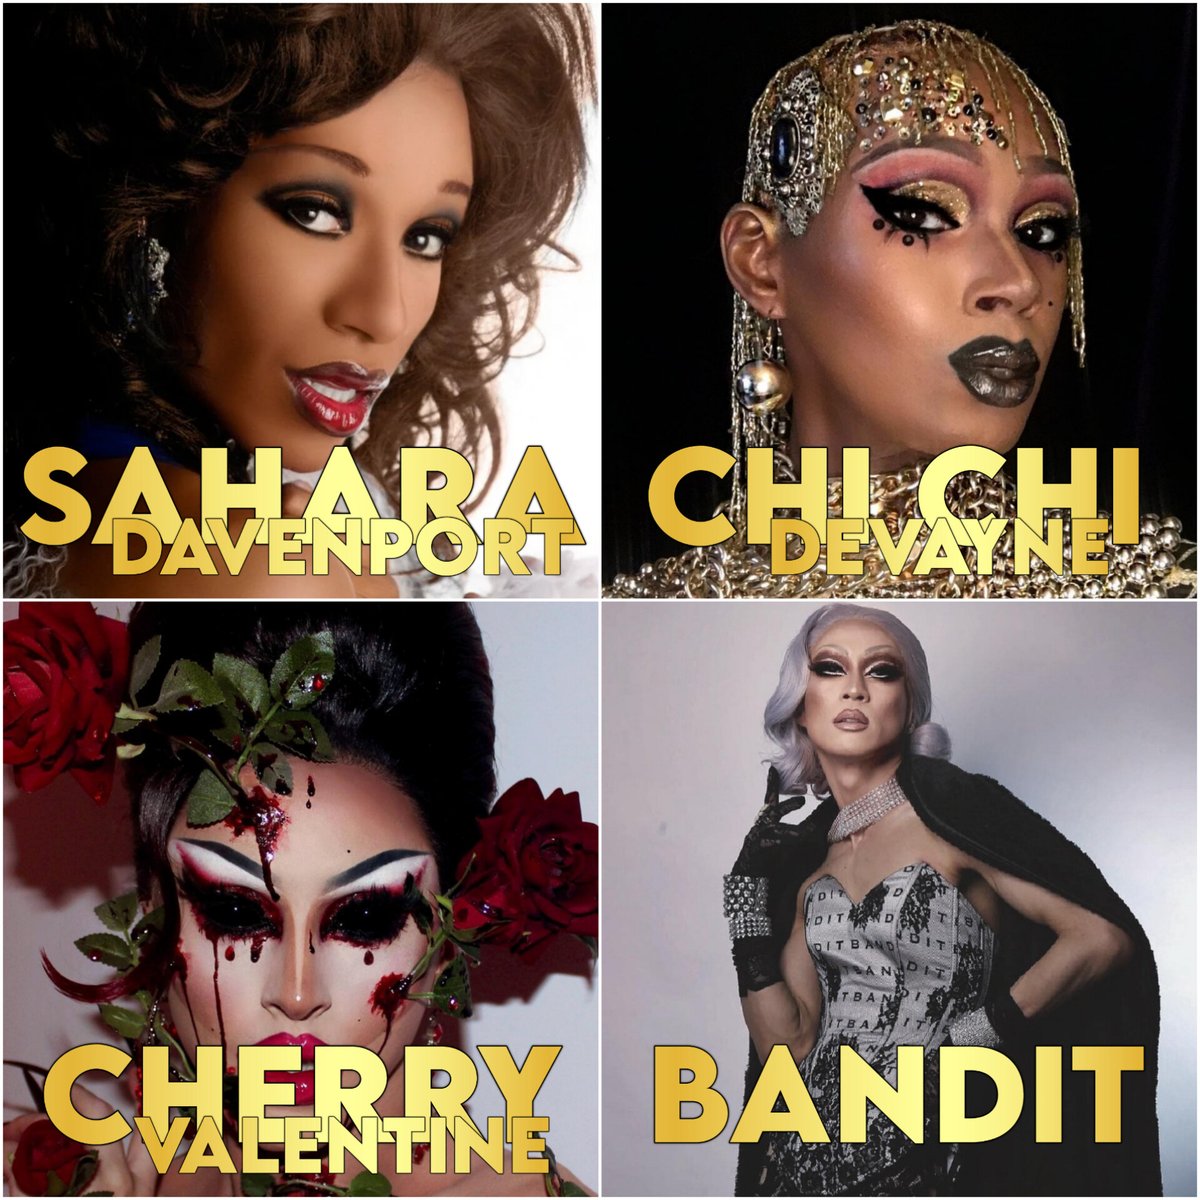 Don't worry, its gonna be my last post about this for now
But give it up for our 4 talented divas, gone way too soon 💔⭐🕊️

#dragrace #rpdr #rupaulsdragrace #dragraceuk #DragRaceThailand